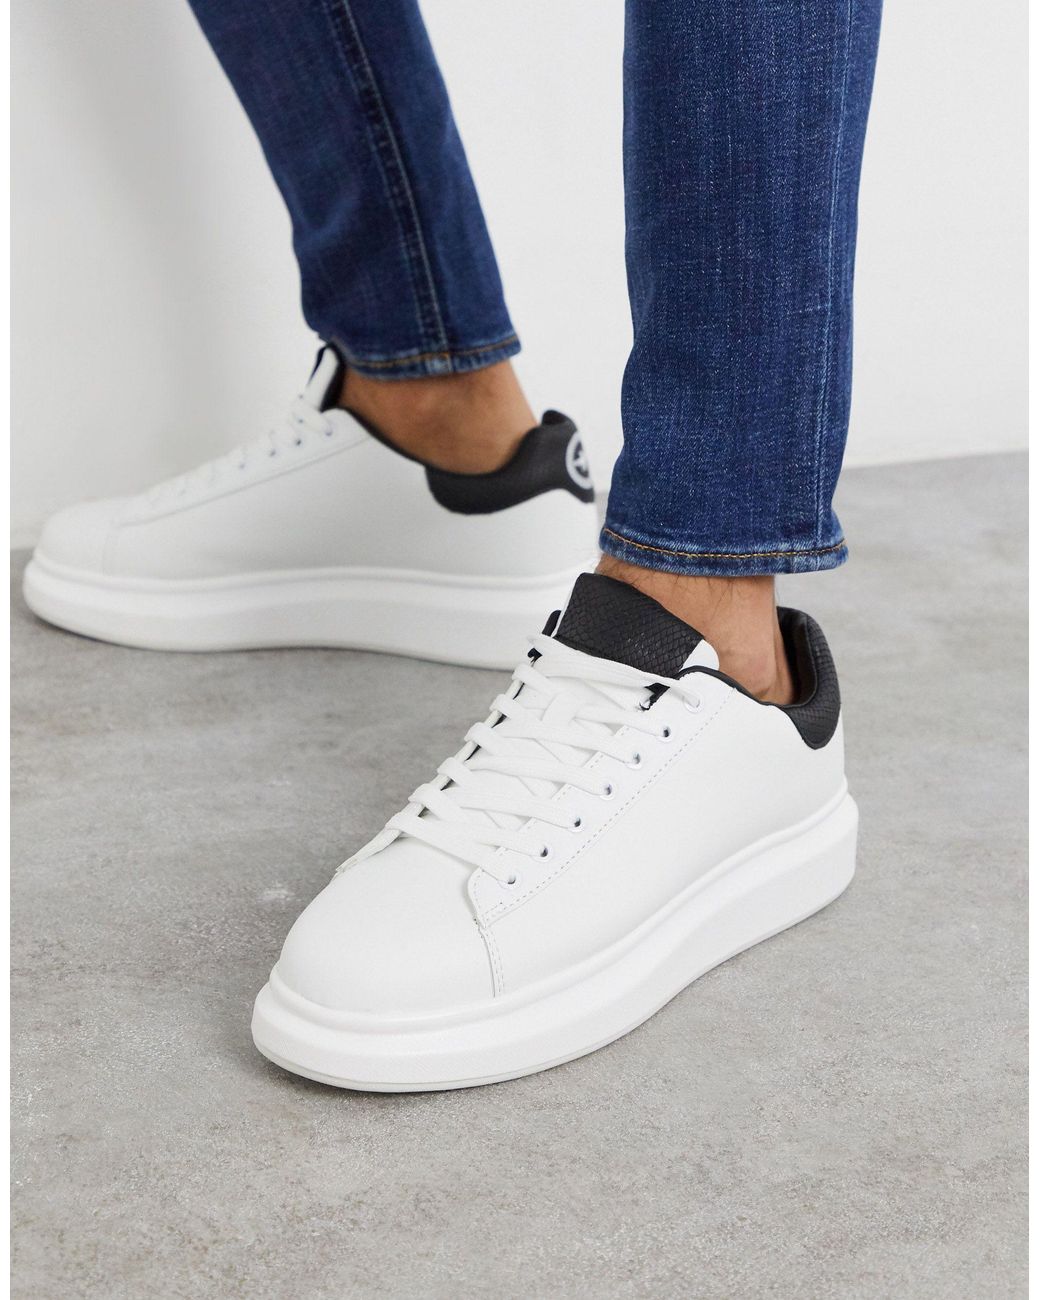 Step Up Chunky Sole Sneakers | Nasty Gal